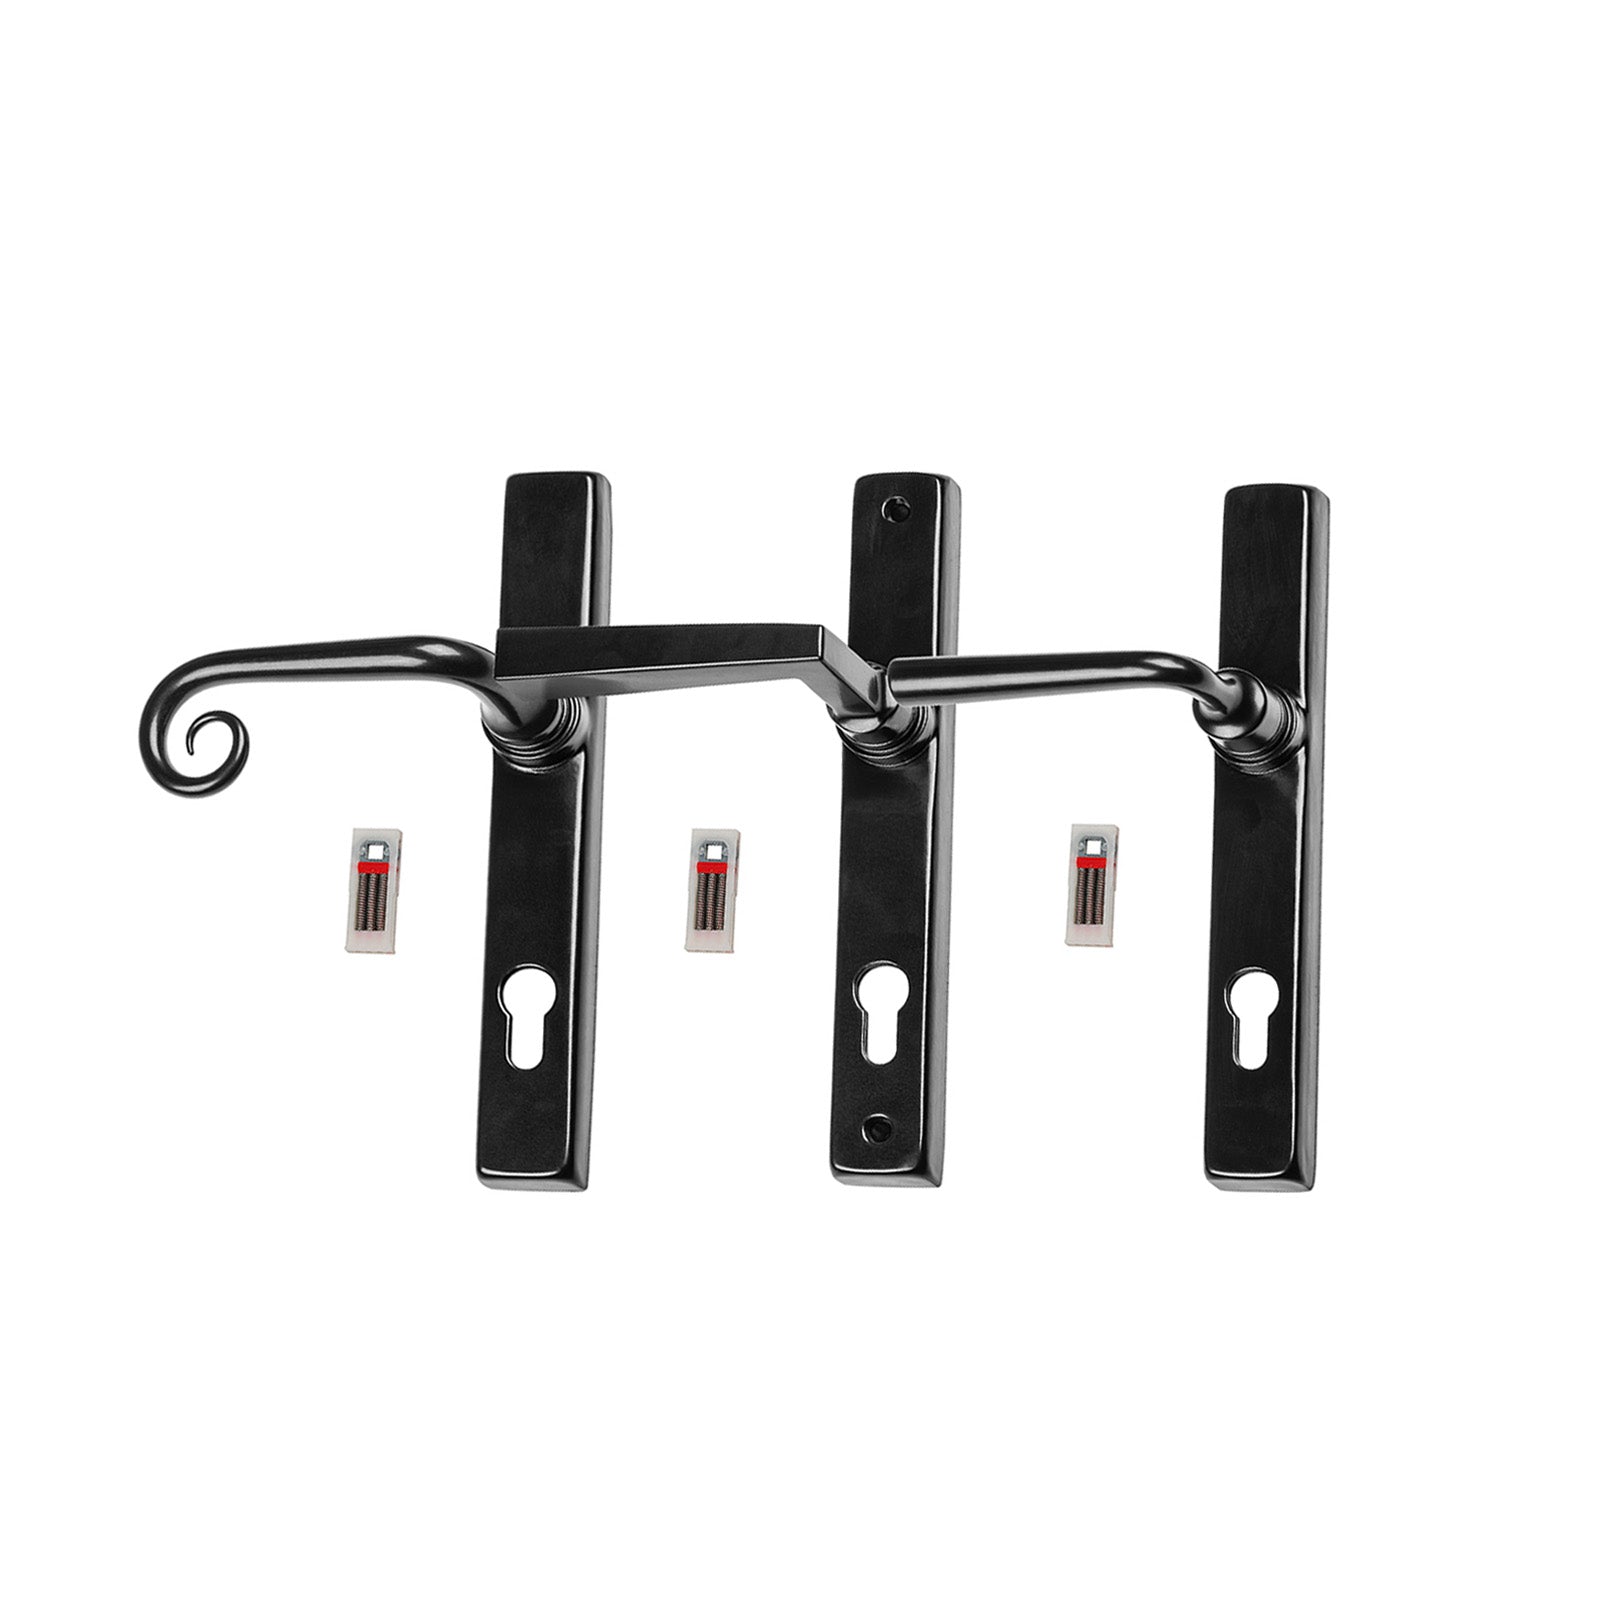 Multipoint Sprung Handles with Armor-Coat